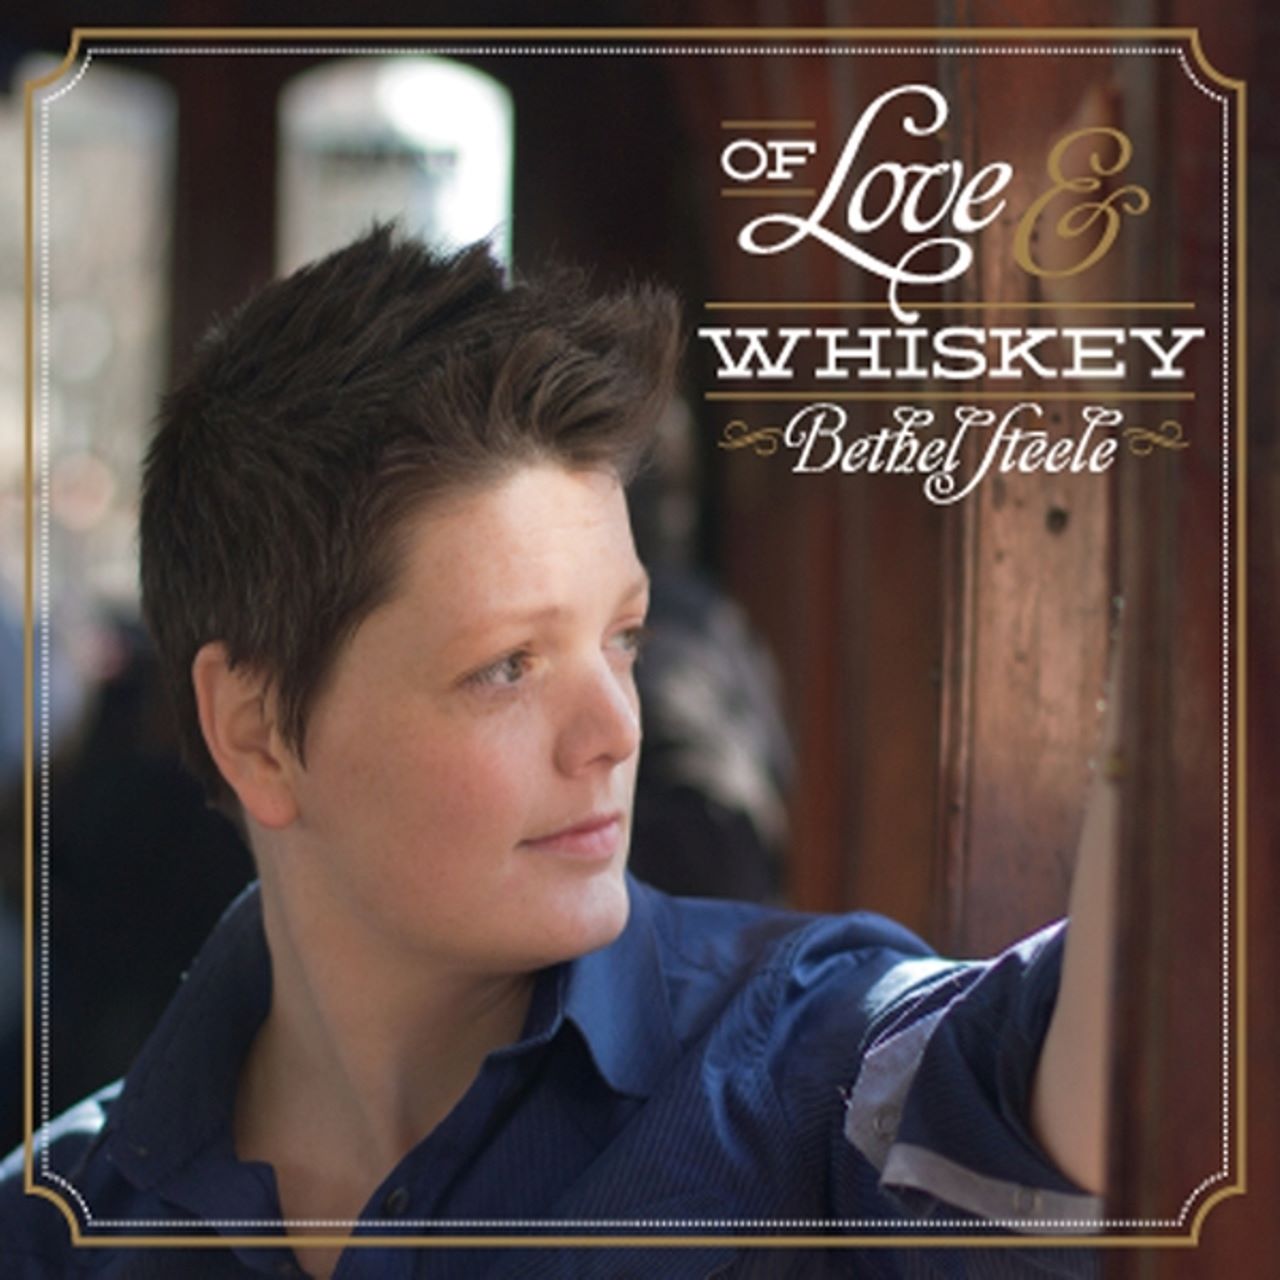 Bethel Steele - Of Love And Whiskey cover album